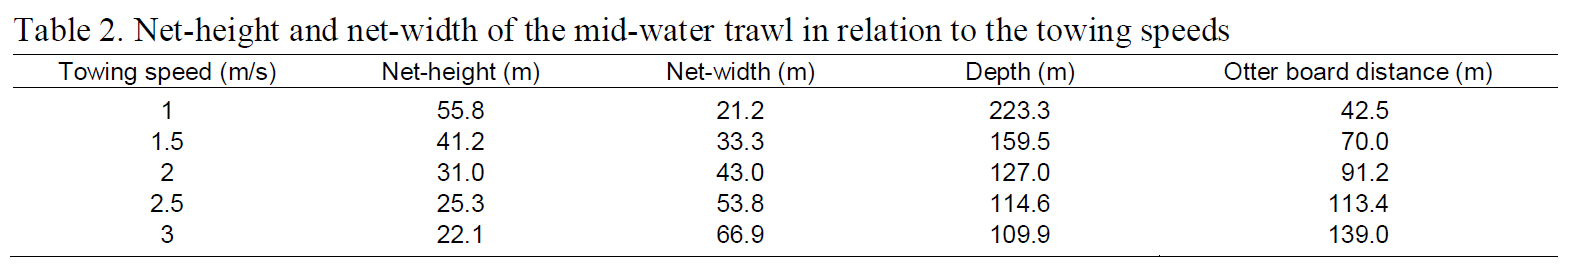 Net-height and net-width of the mid-water trawl in relation to the towing speeds